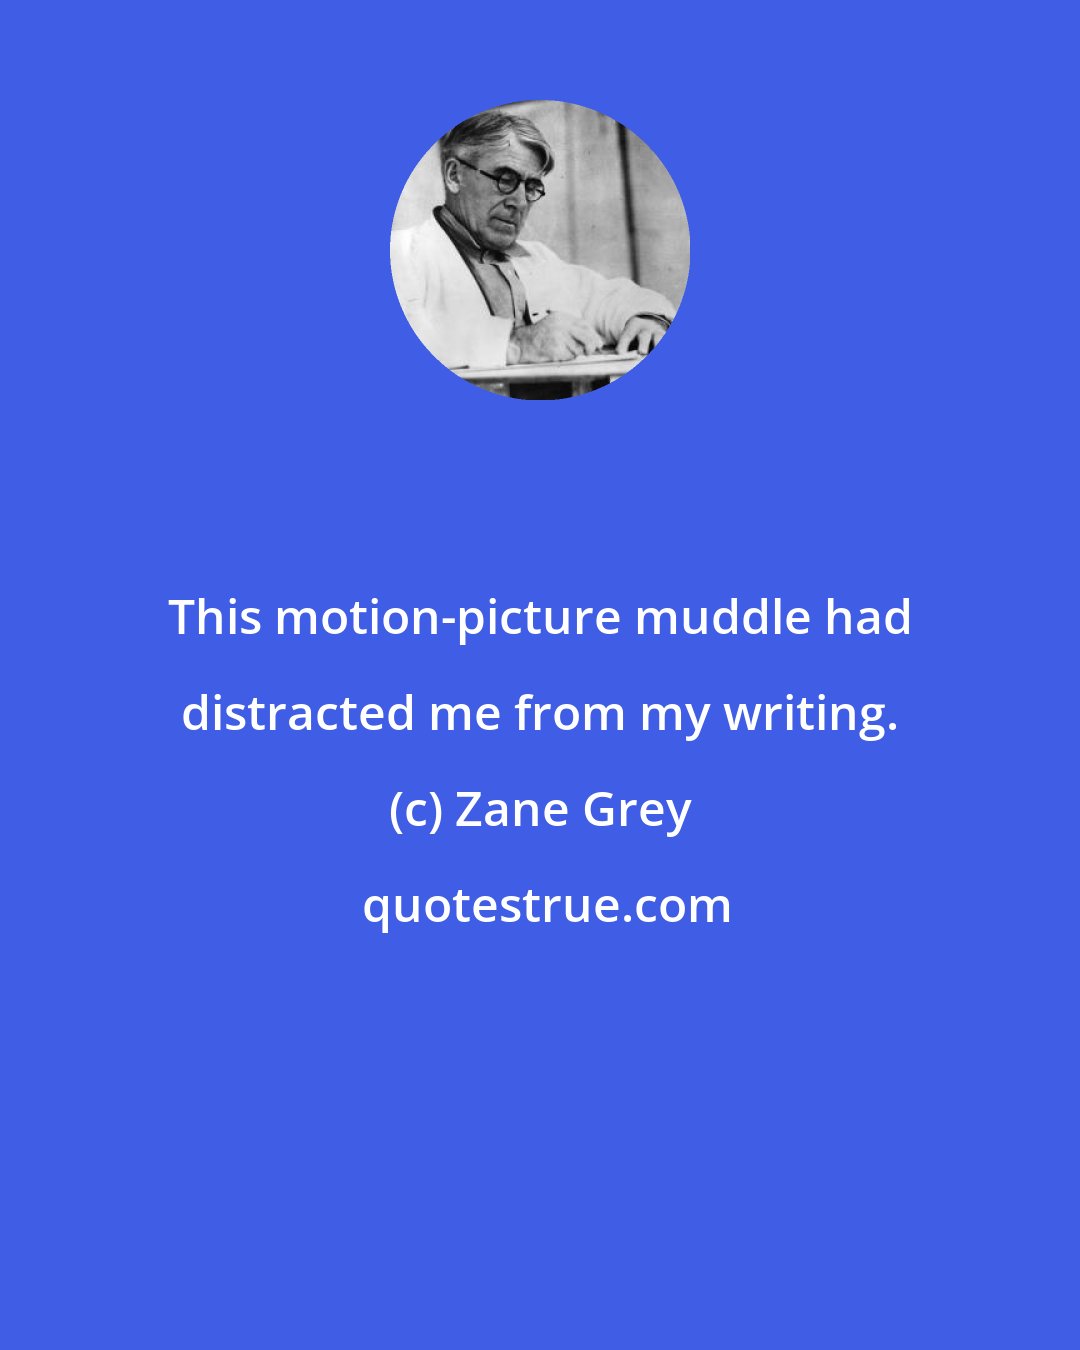 Zane Grey: This motion-picture muddle had distracted me from my writing.